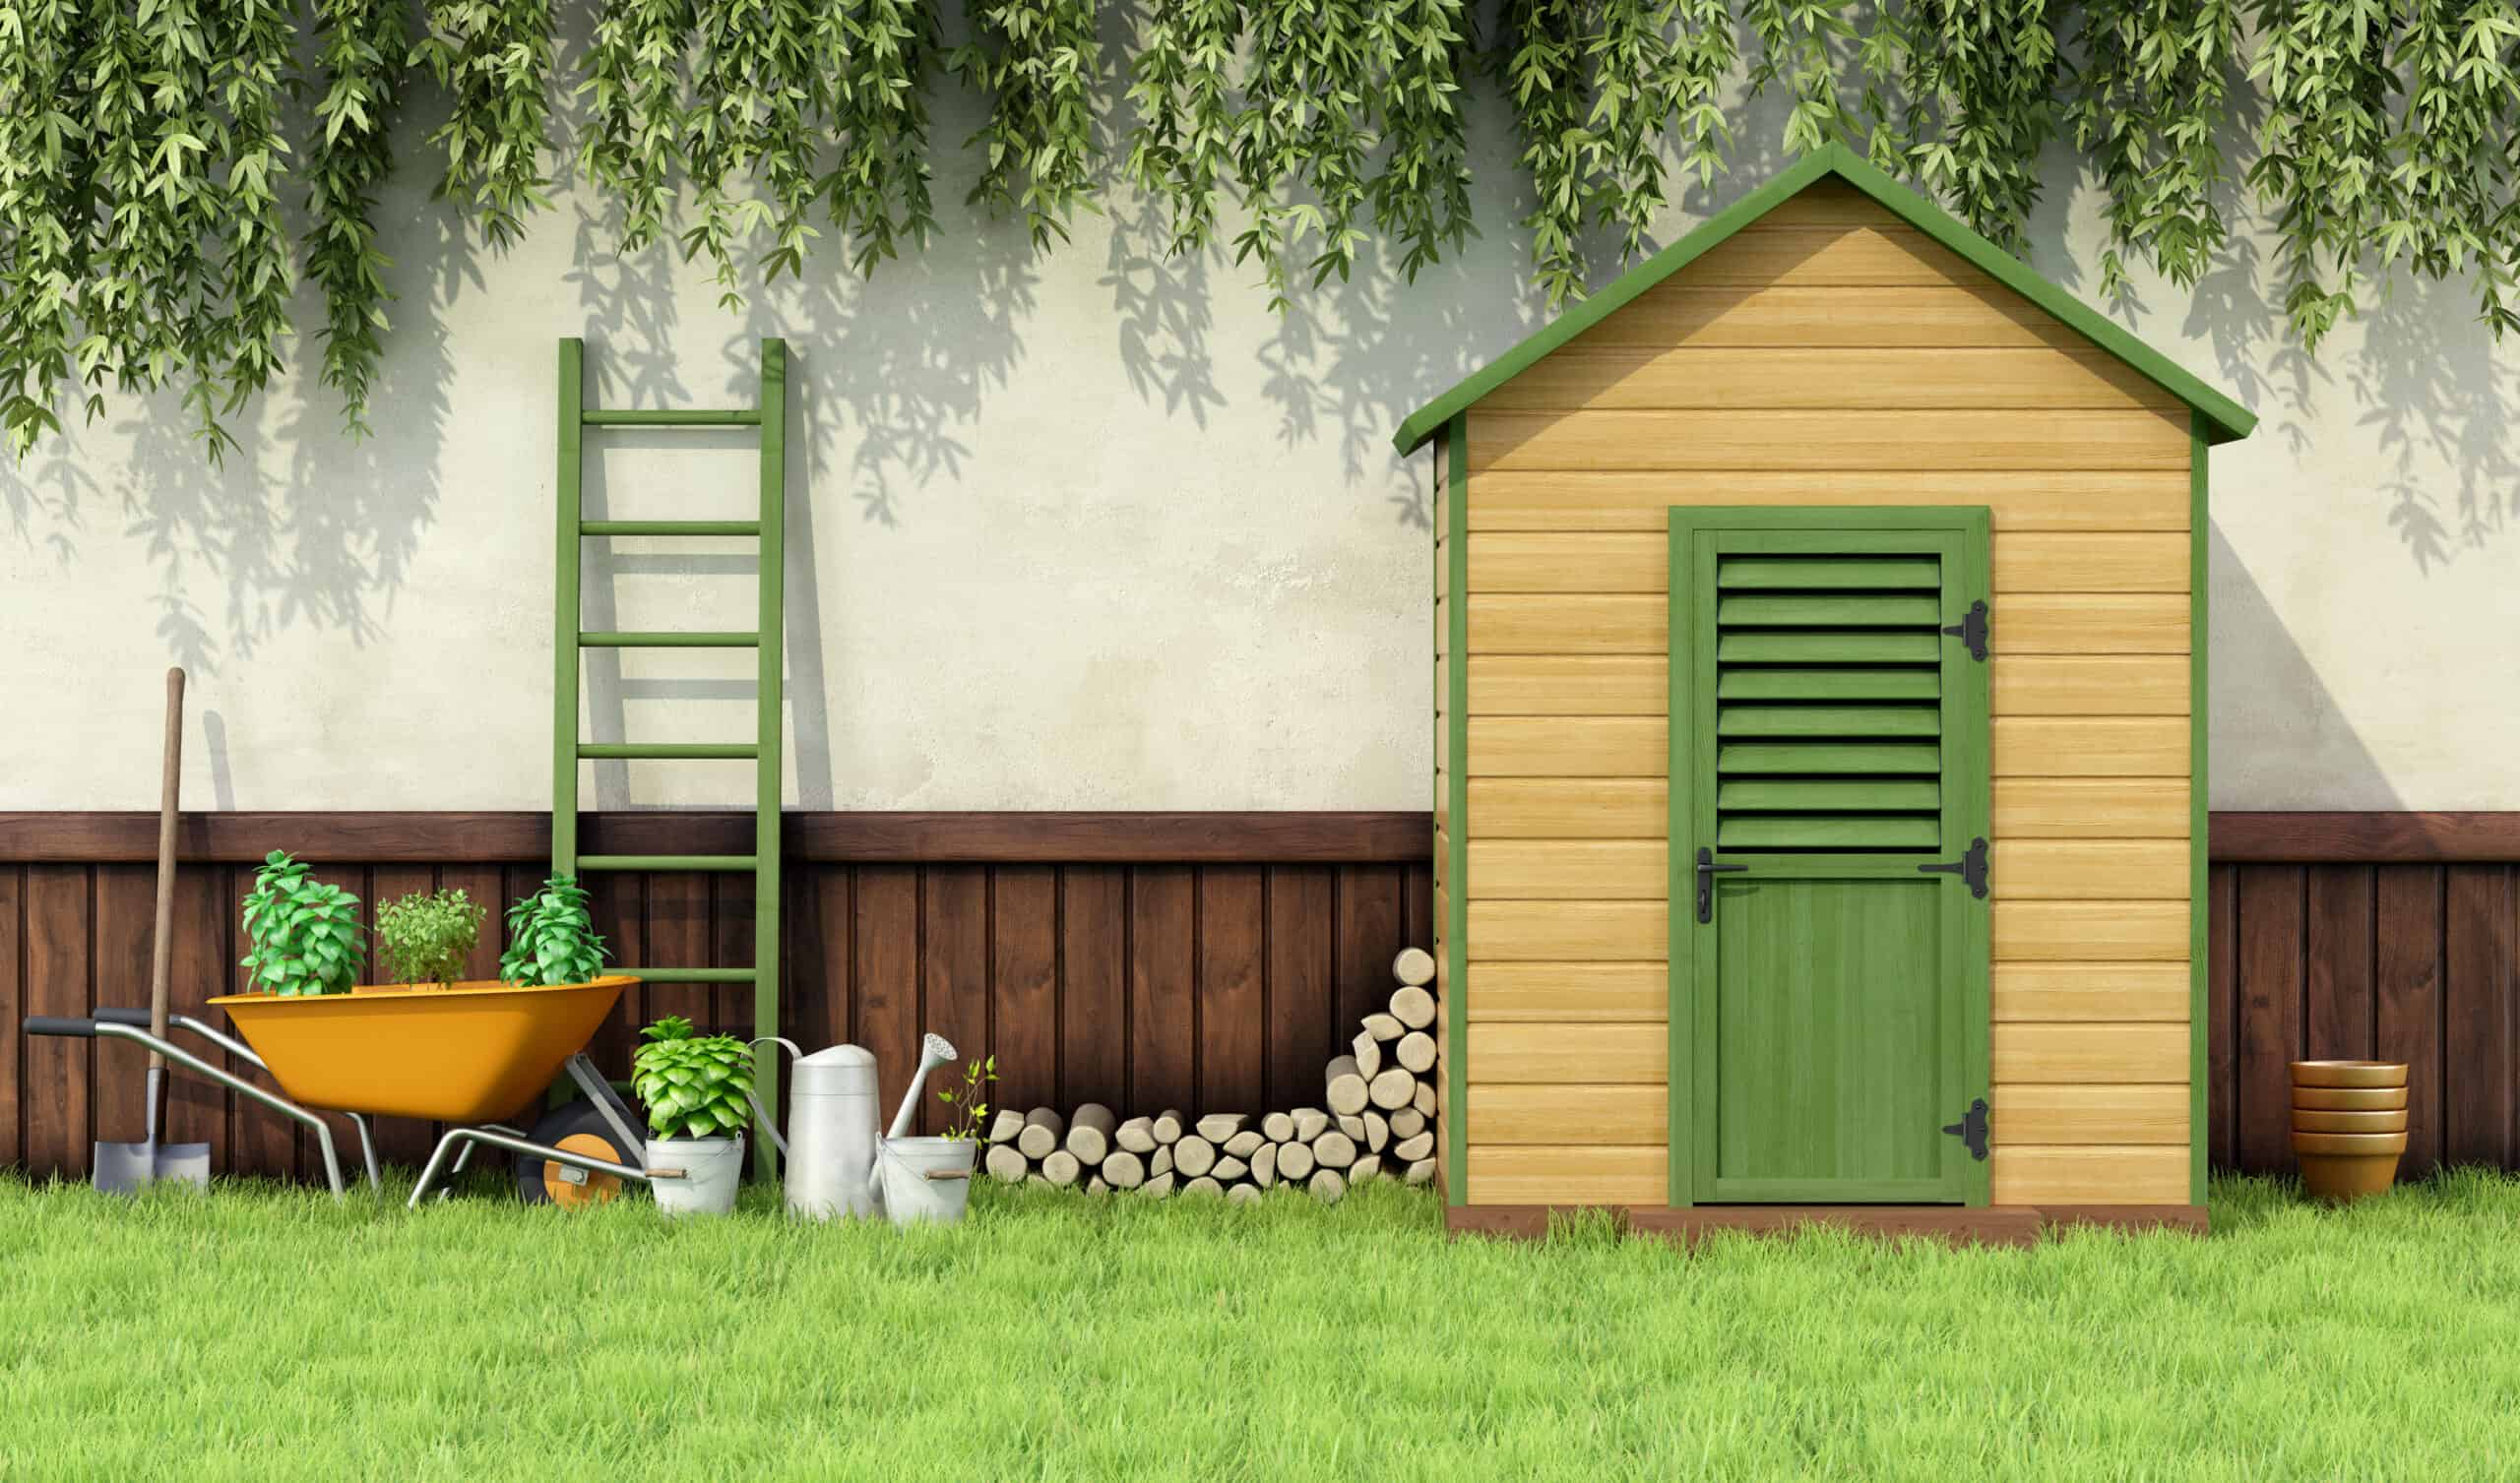 From Storage to Style: Creative Shed Ideas for Spring